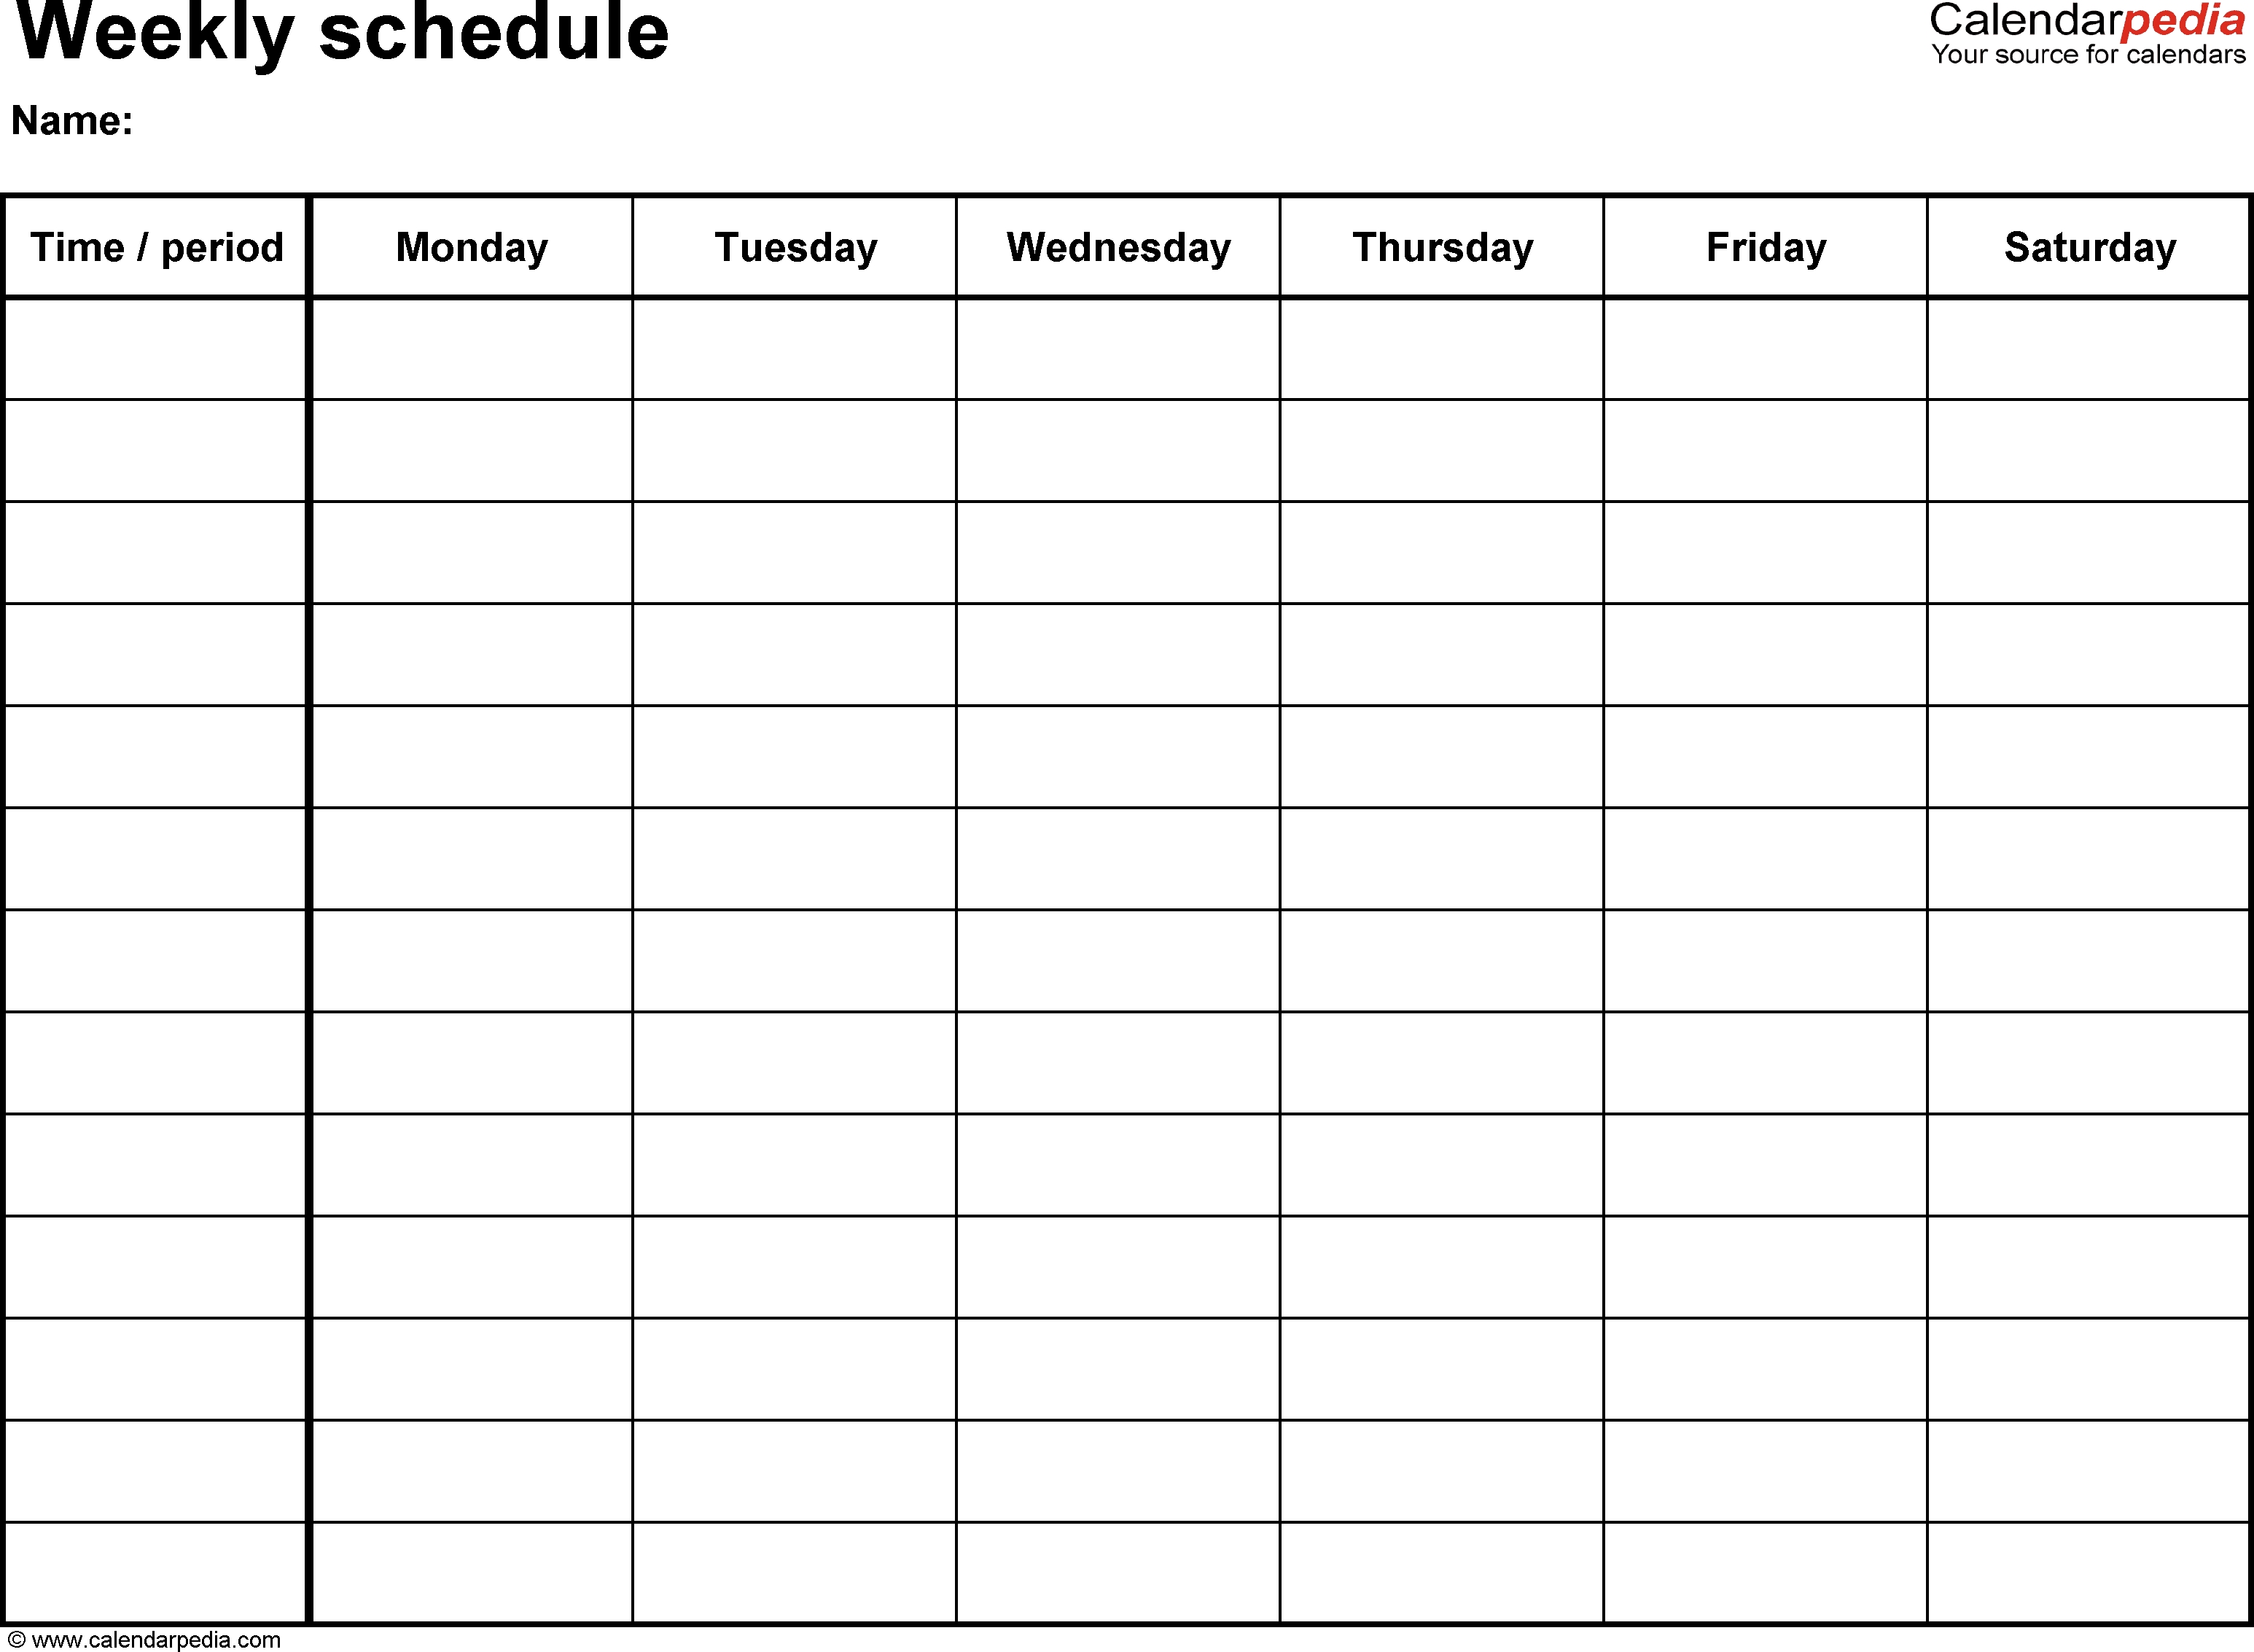 Free Weekly Schedule Templates For Pdf - 18 Templates pertaining to Free Printable Weekly Calendars Pdf